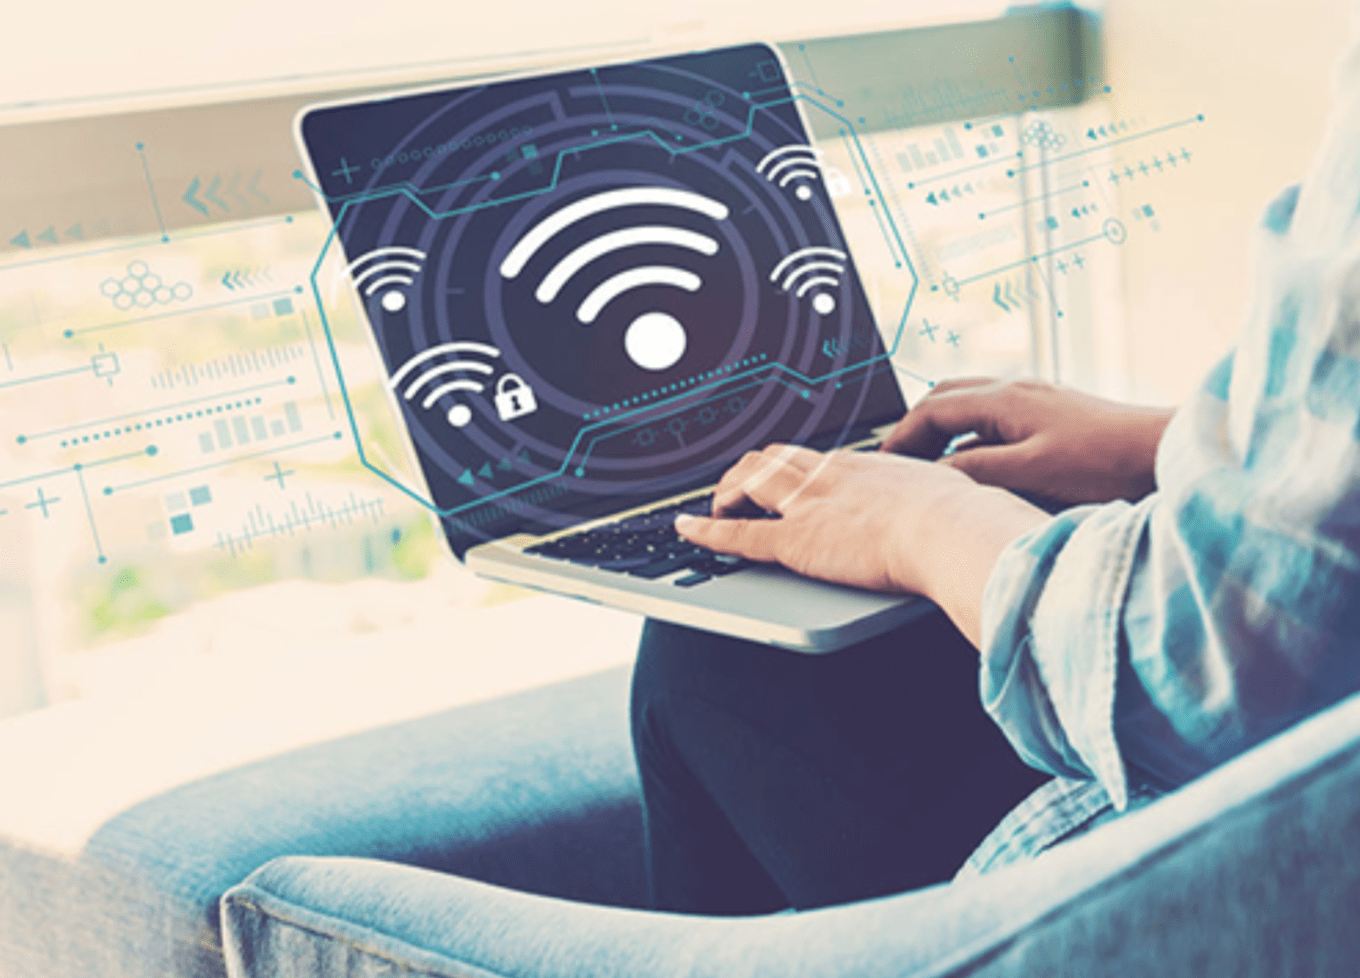 How to Improve the Wi-Fi Connection while Staying at Home